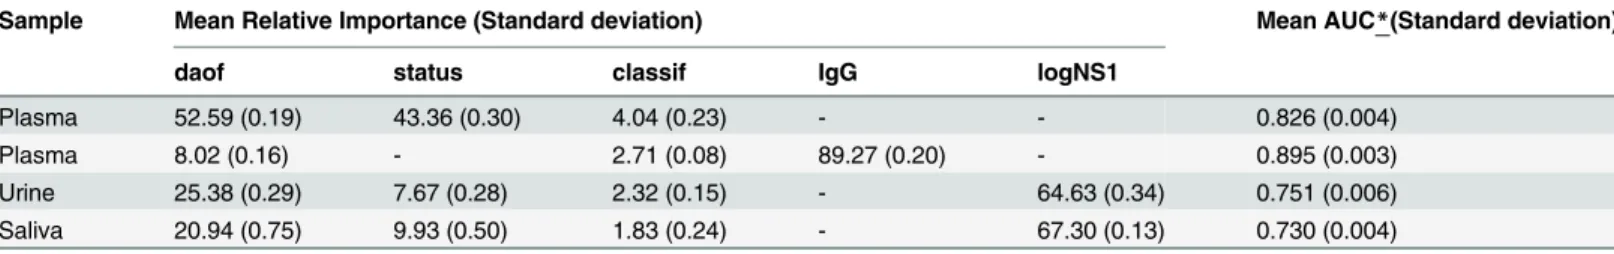 Table 5. Results of the Boosted Regression Trees analysis for the detection of NS1 antigen in plasma, urine and saliva.